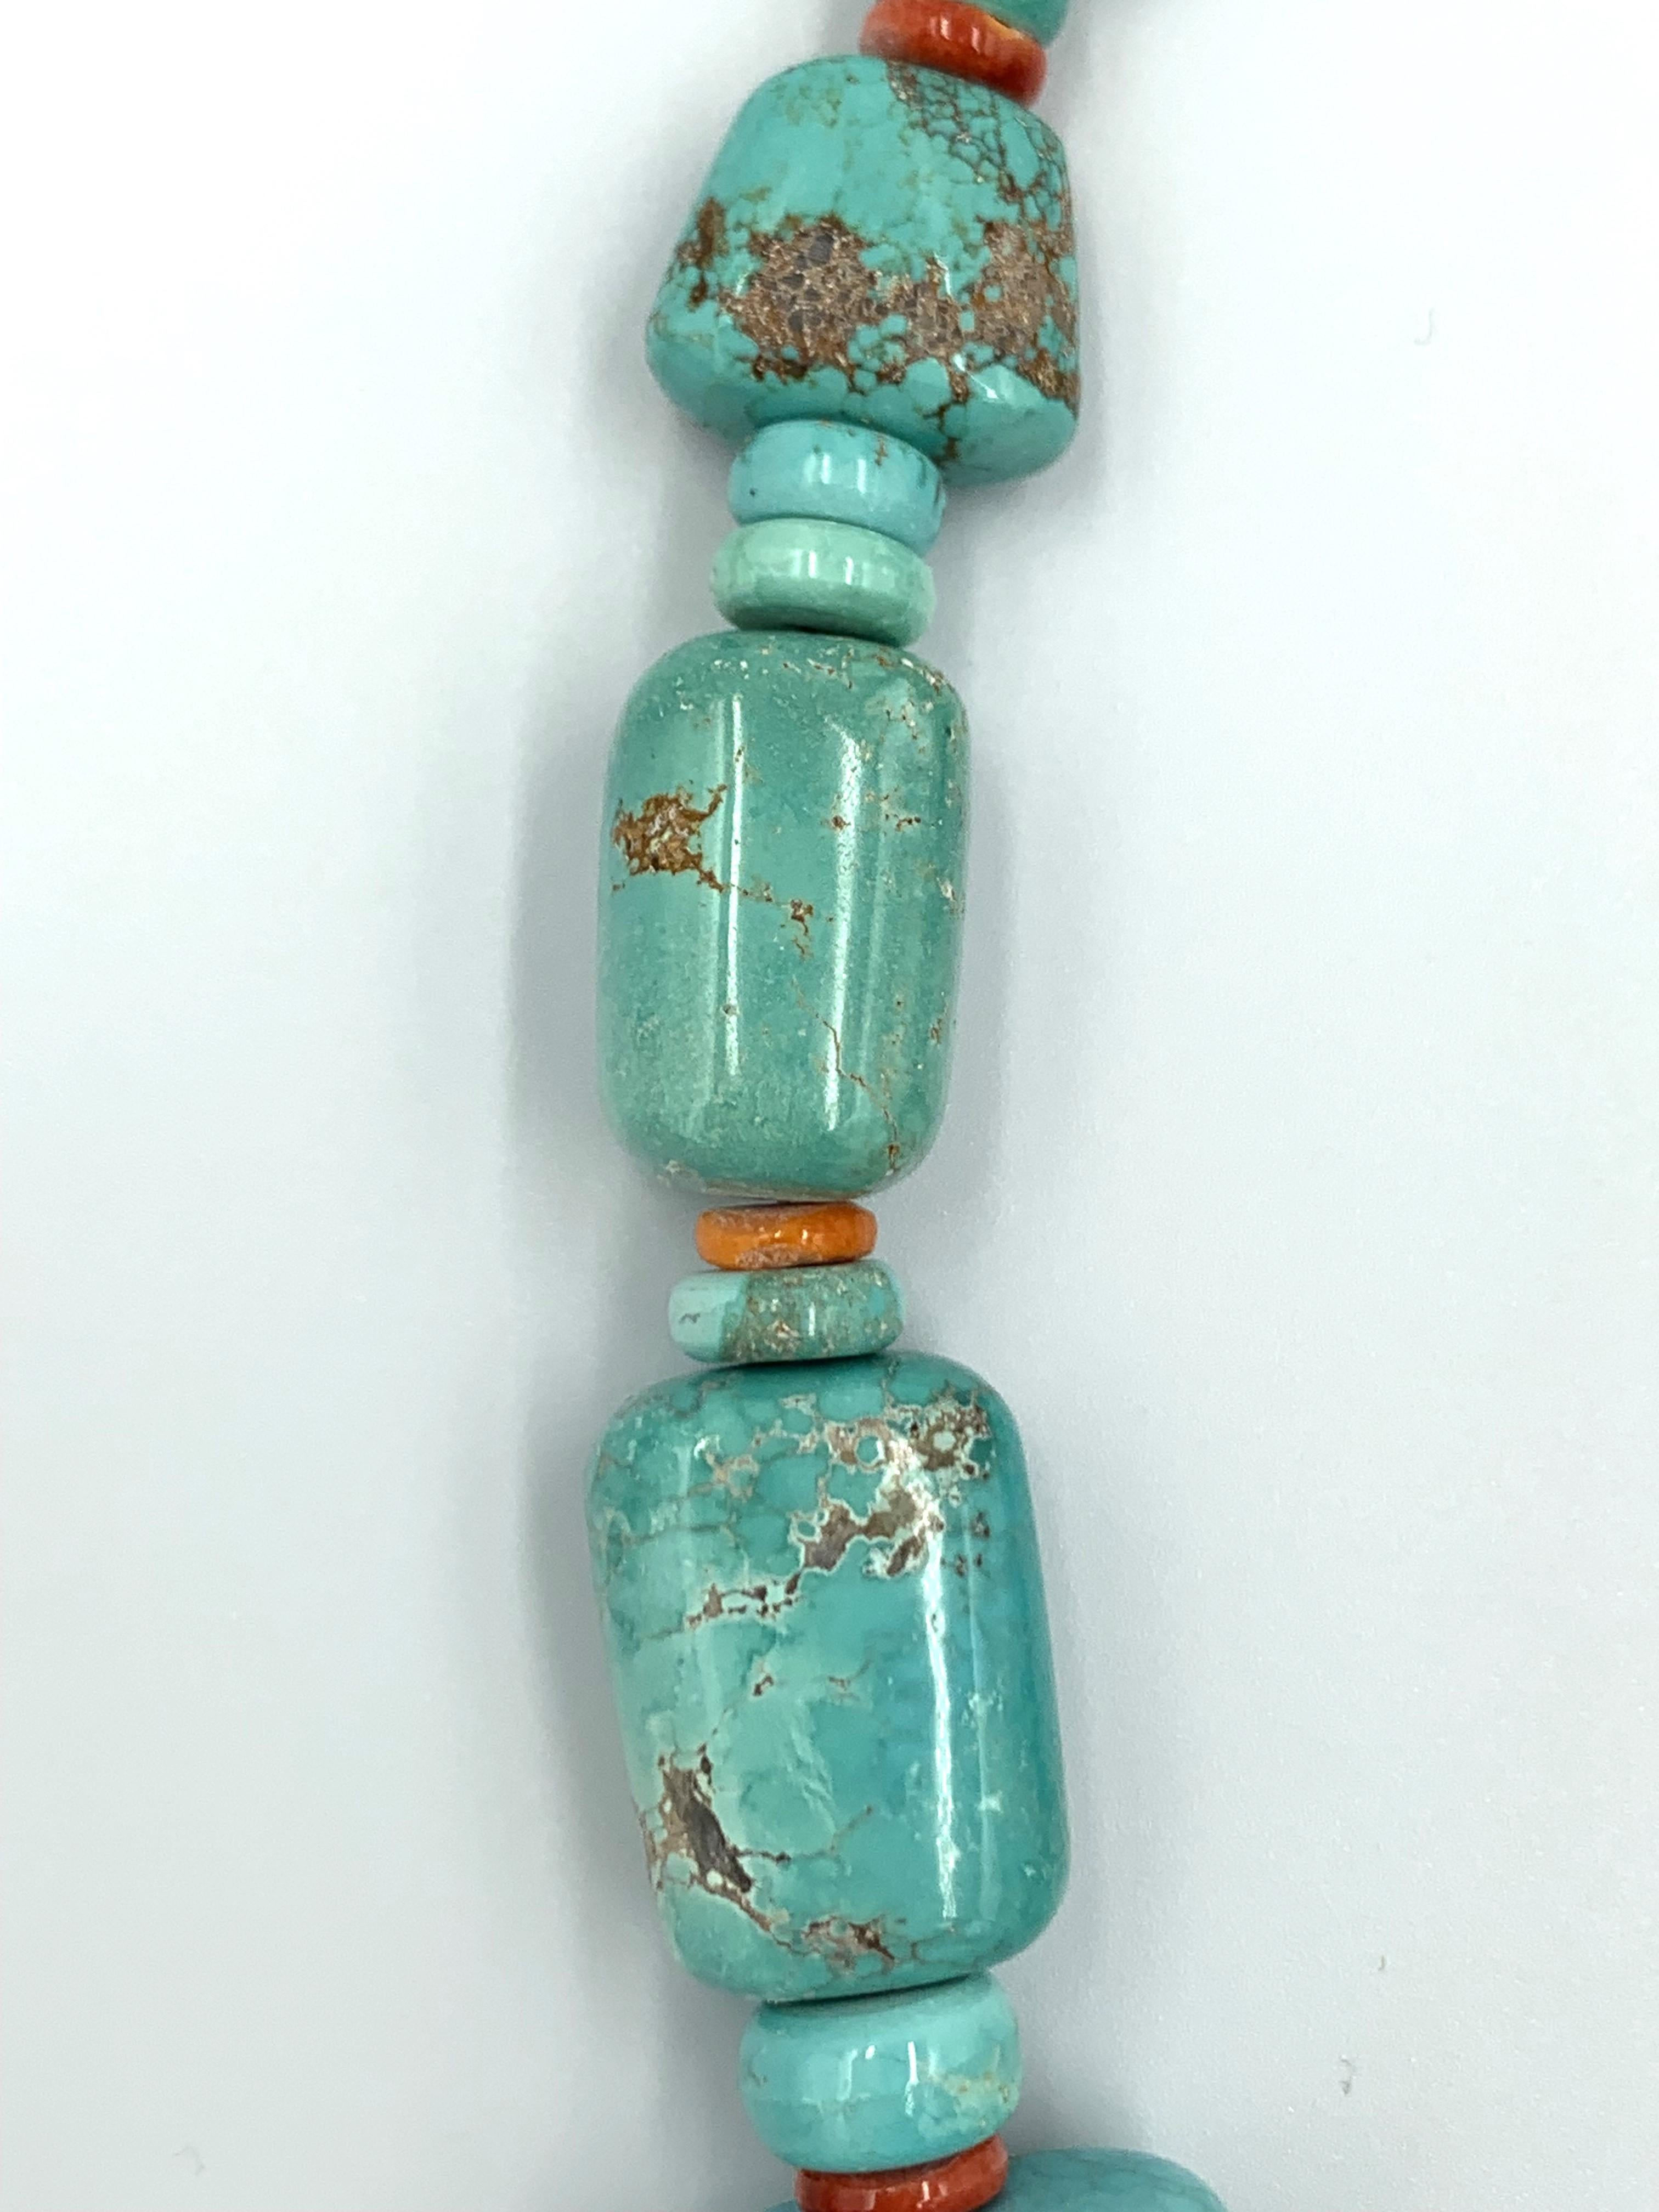 Native American Carico Lake Turquoise Bead Necklace by Bruce Eckhardt For Sale